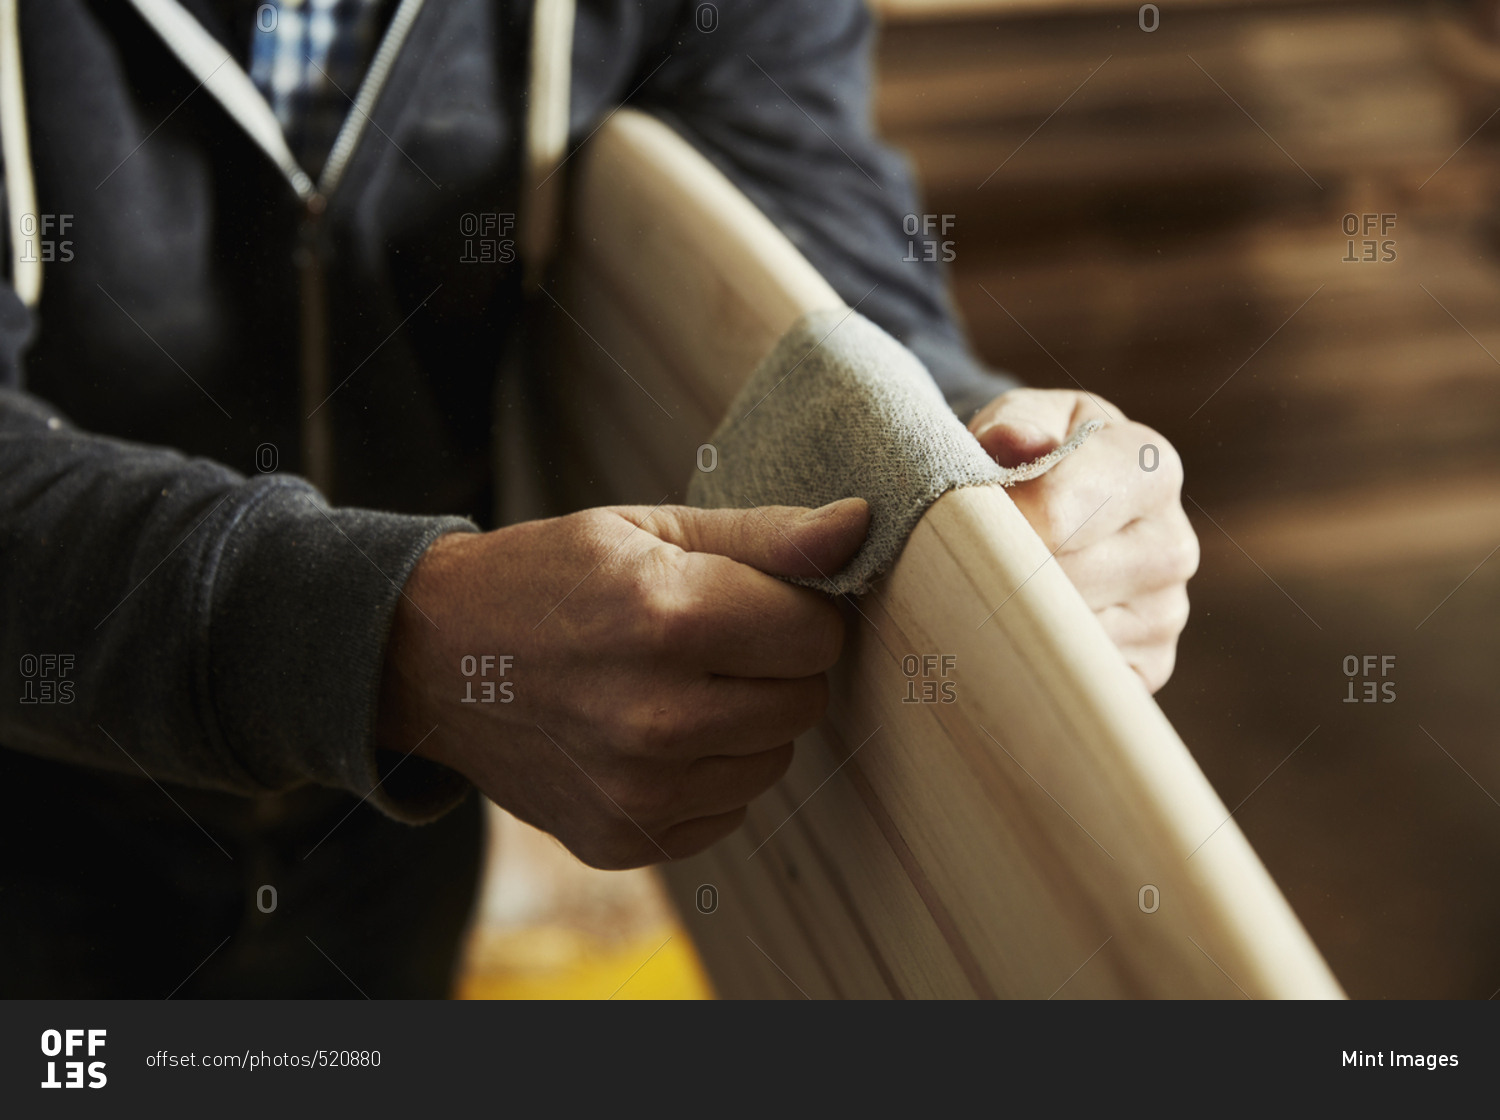 Man standing in a workshop sanding the rounded edge of a wooden surfboard.